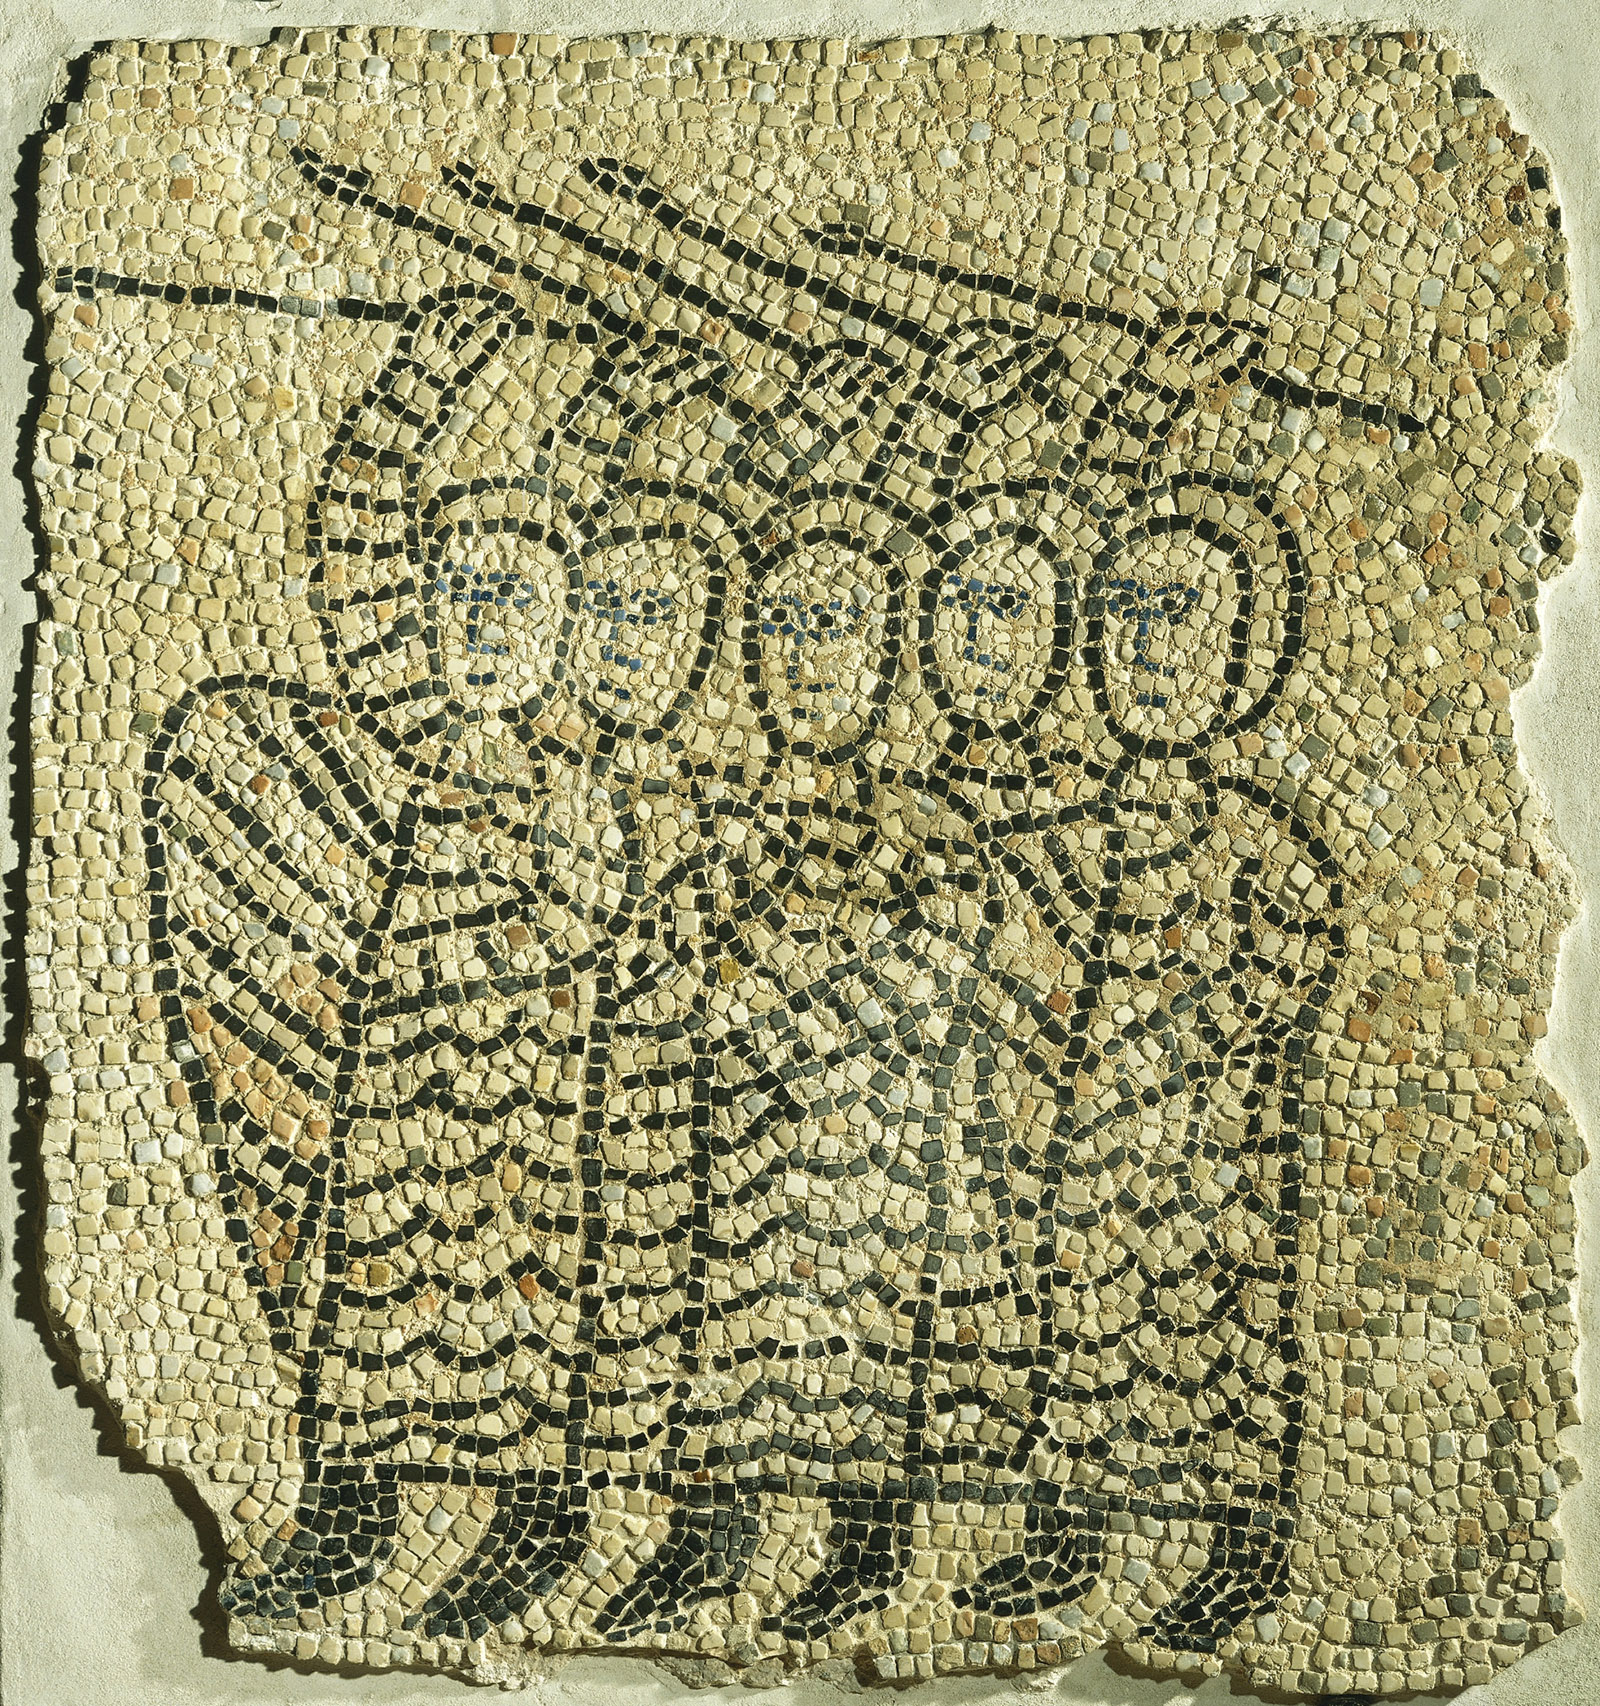 A detail of mosaic flooring depicting soldiers in the Fourth Crusade; from the Church of Saint John the Evangelist, Ravenna